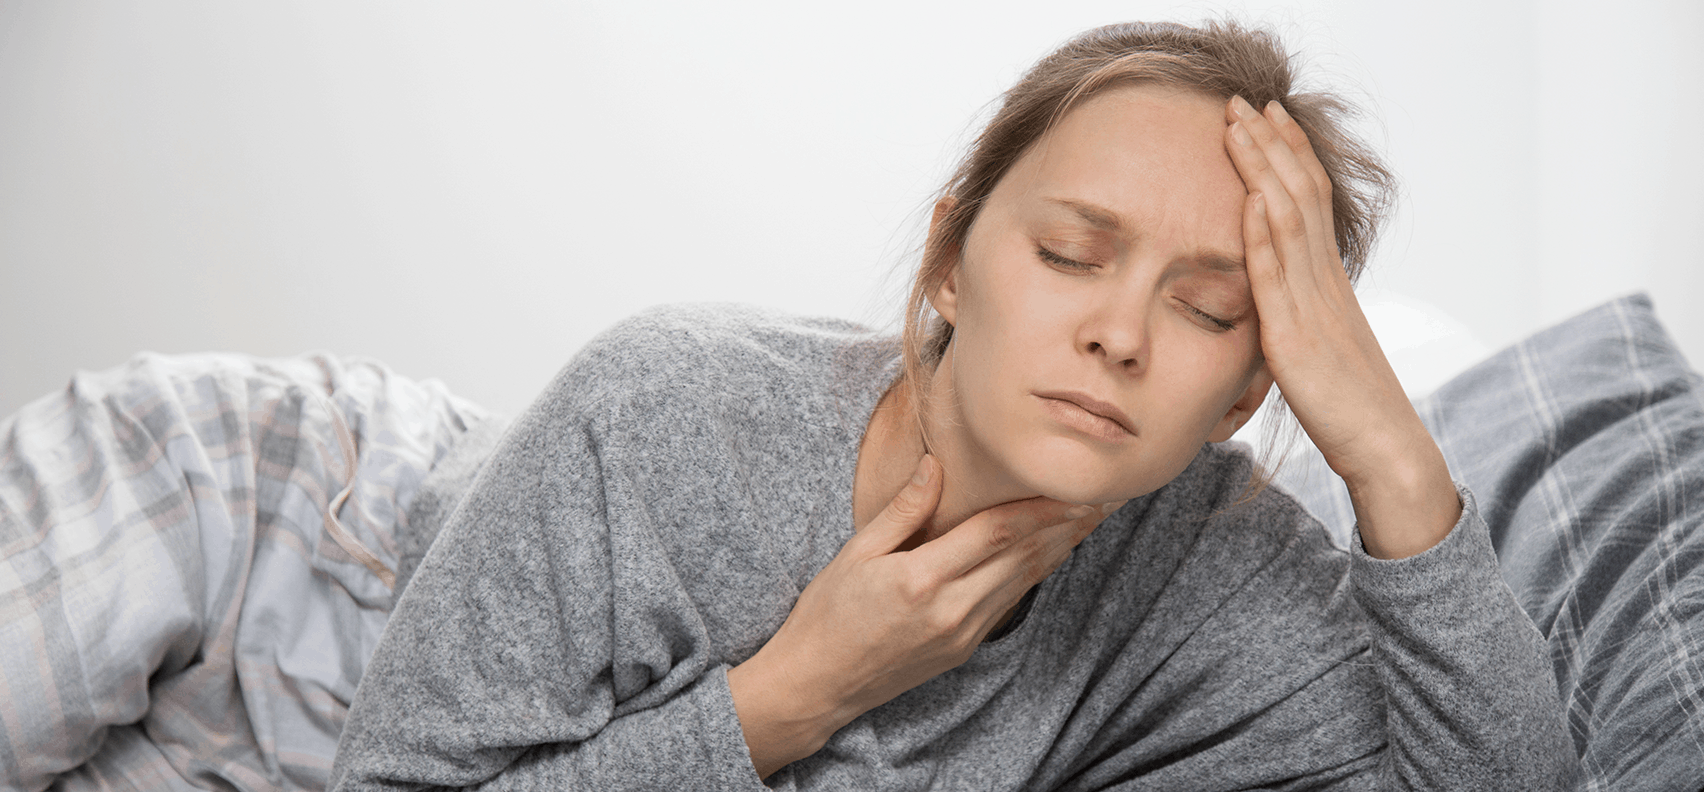 Can Allergies Cause Fever, Sore Throat or Coughing?